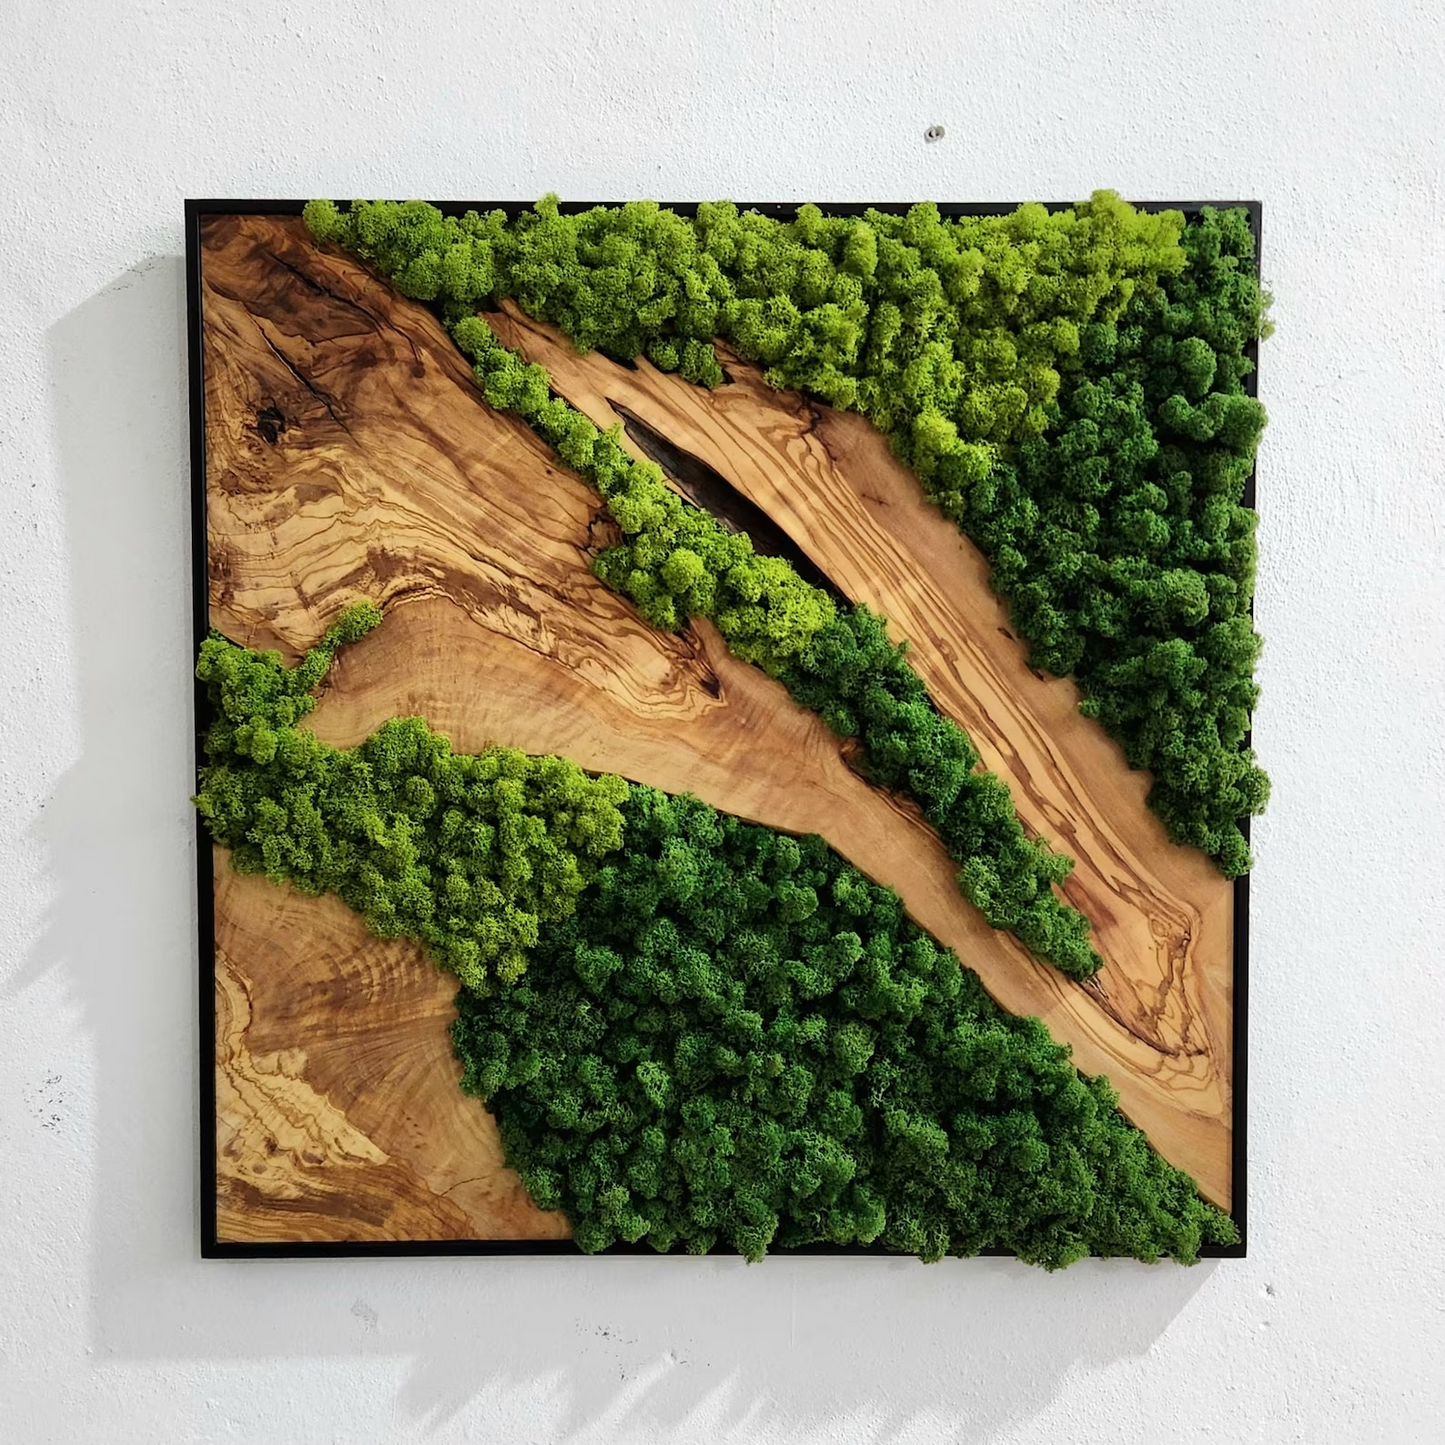 Handmade Moss and Olive Wood Home Decor With Metal Frame, Live Edge Wall Decor, Rustic Wooden Wall Decor, Wall Art, Farmhouse Wall Art